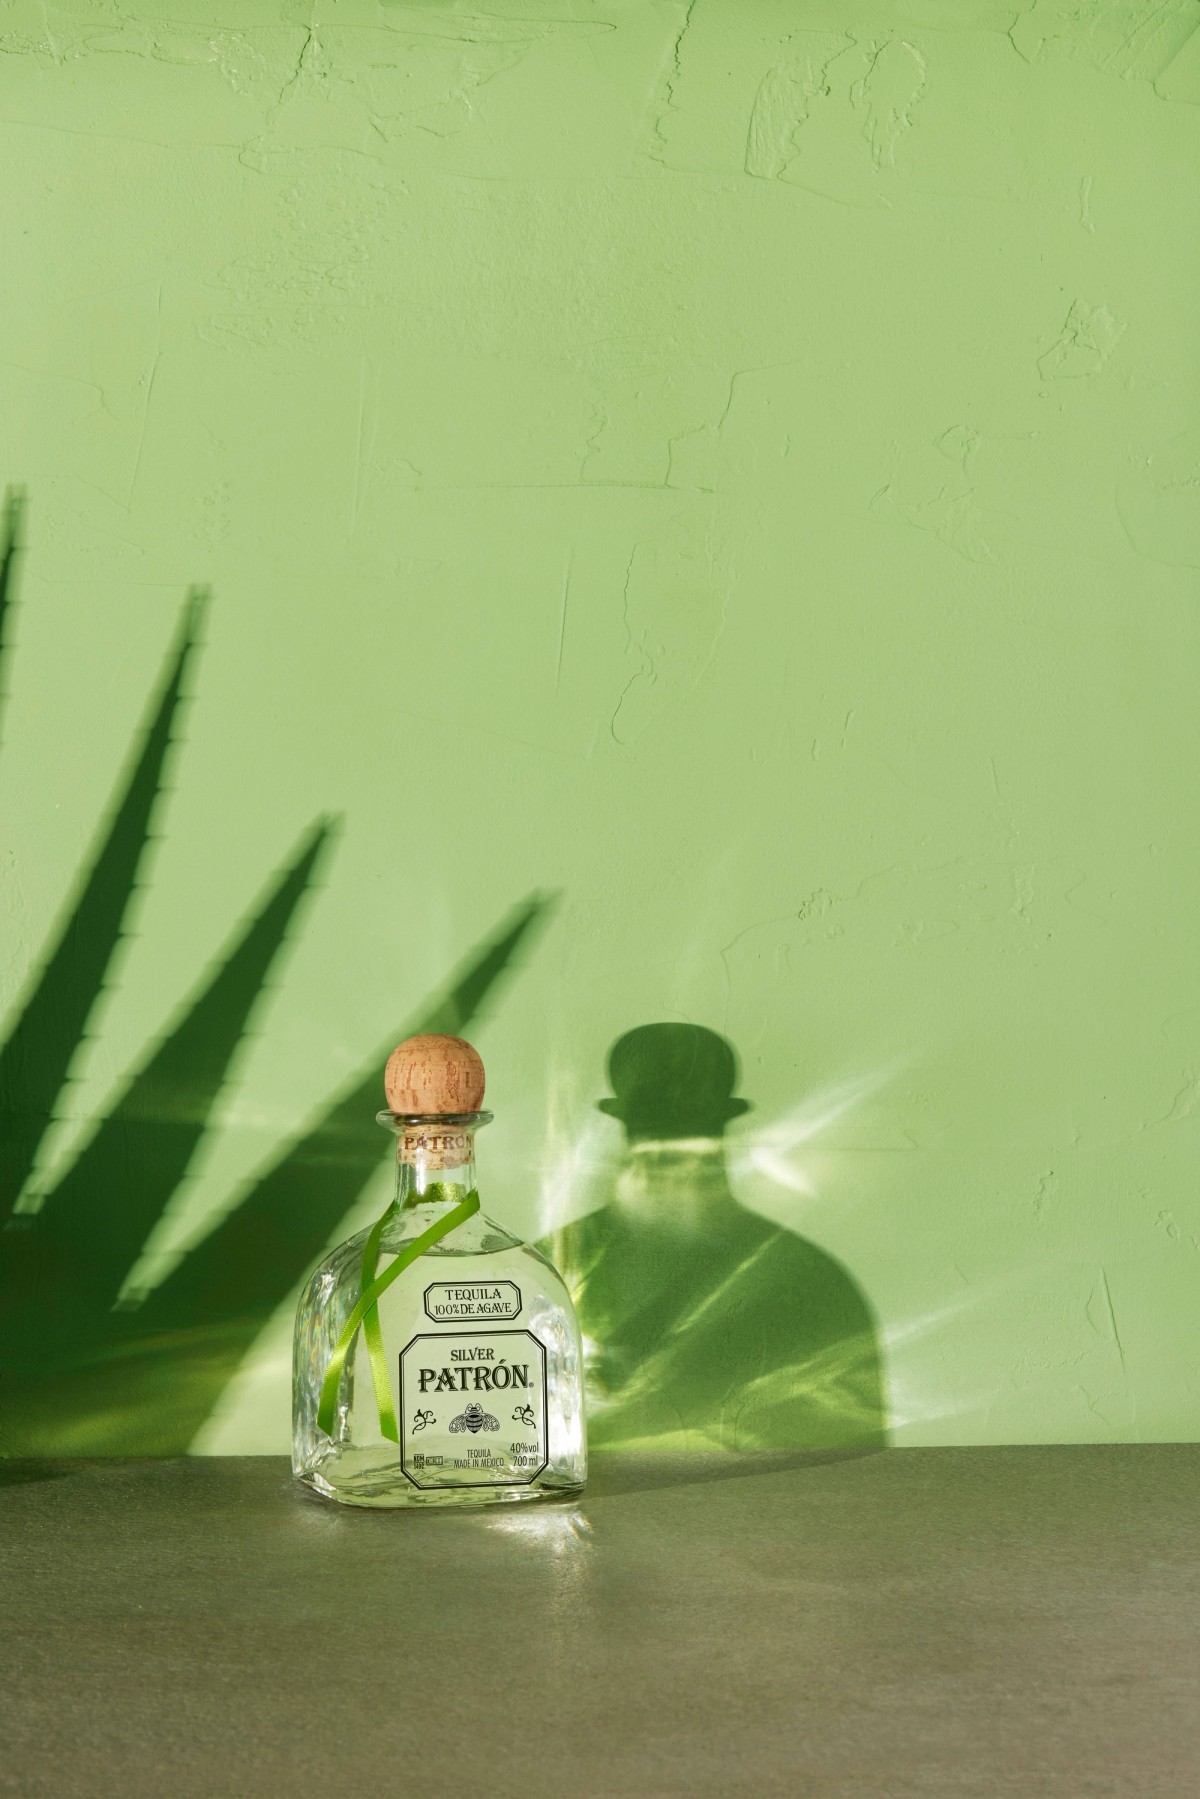 Patron Silver in a custom-built Mexican-inspired set photographed by Jason Bailey Studio